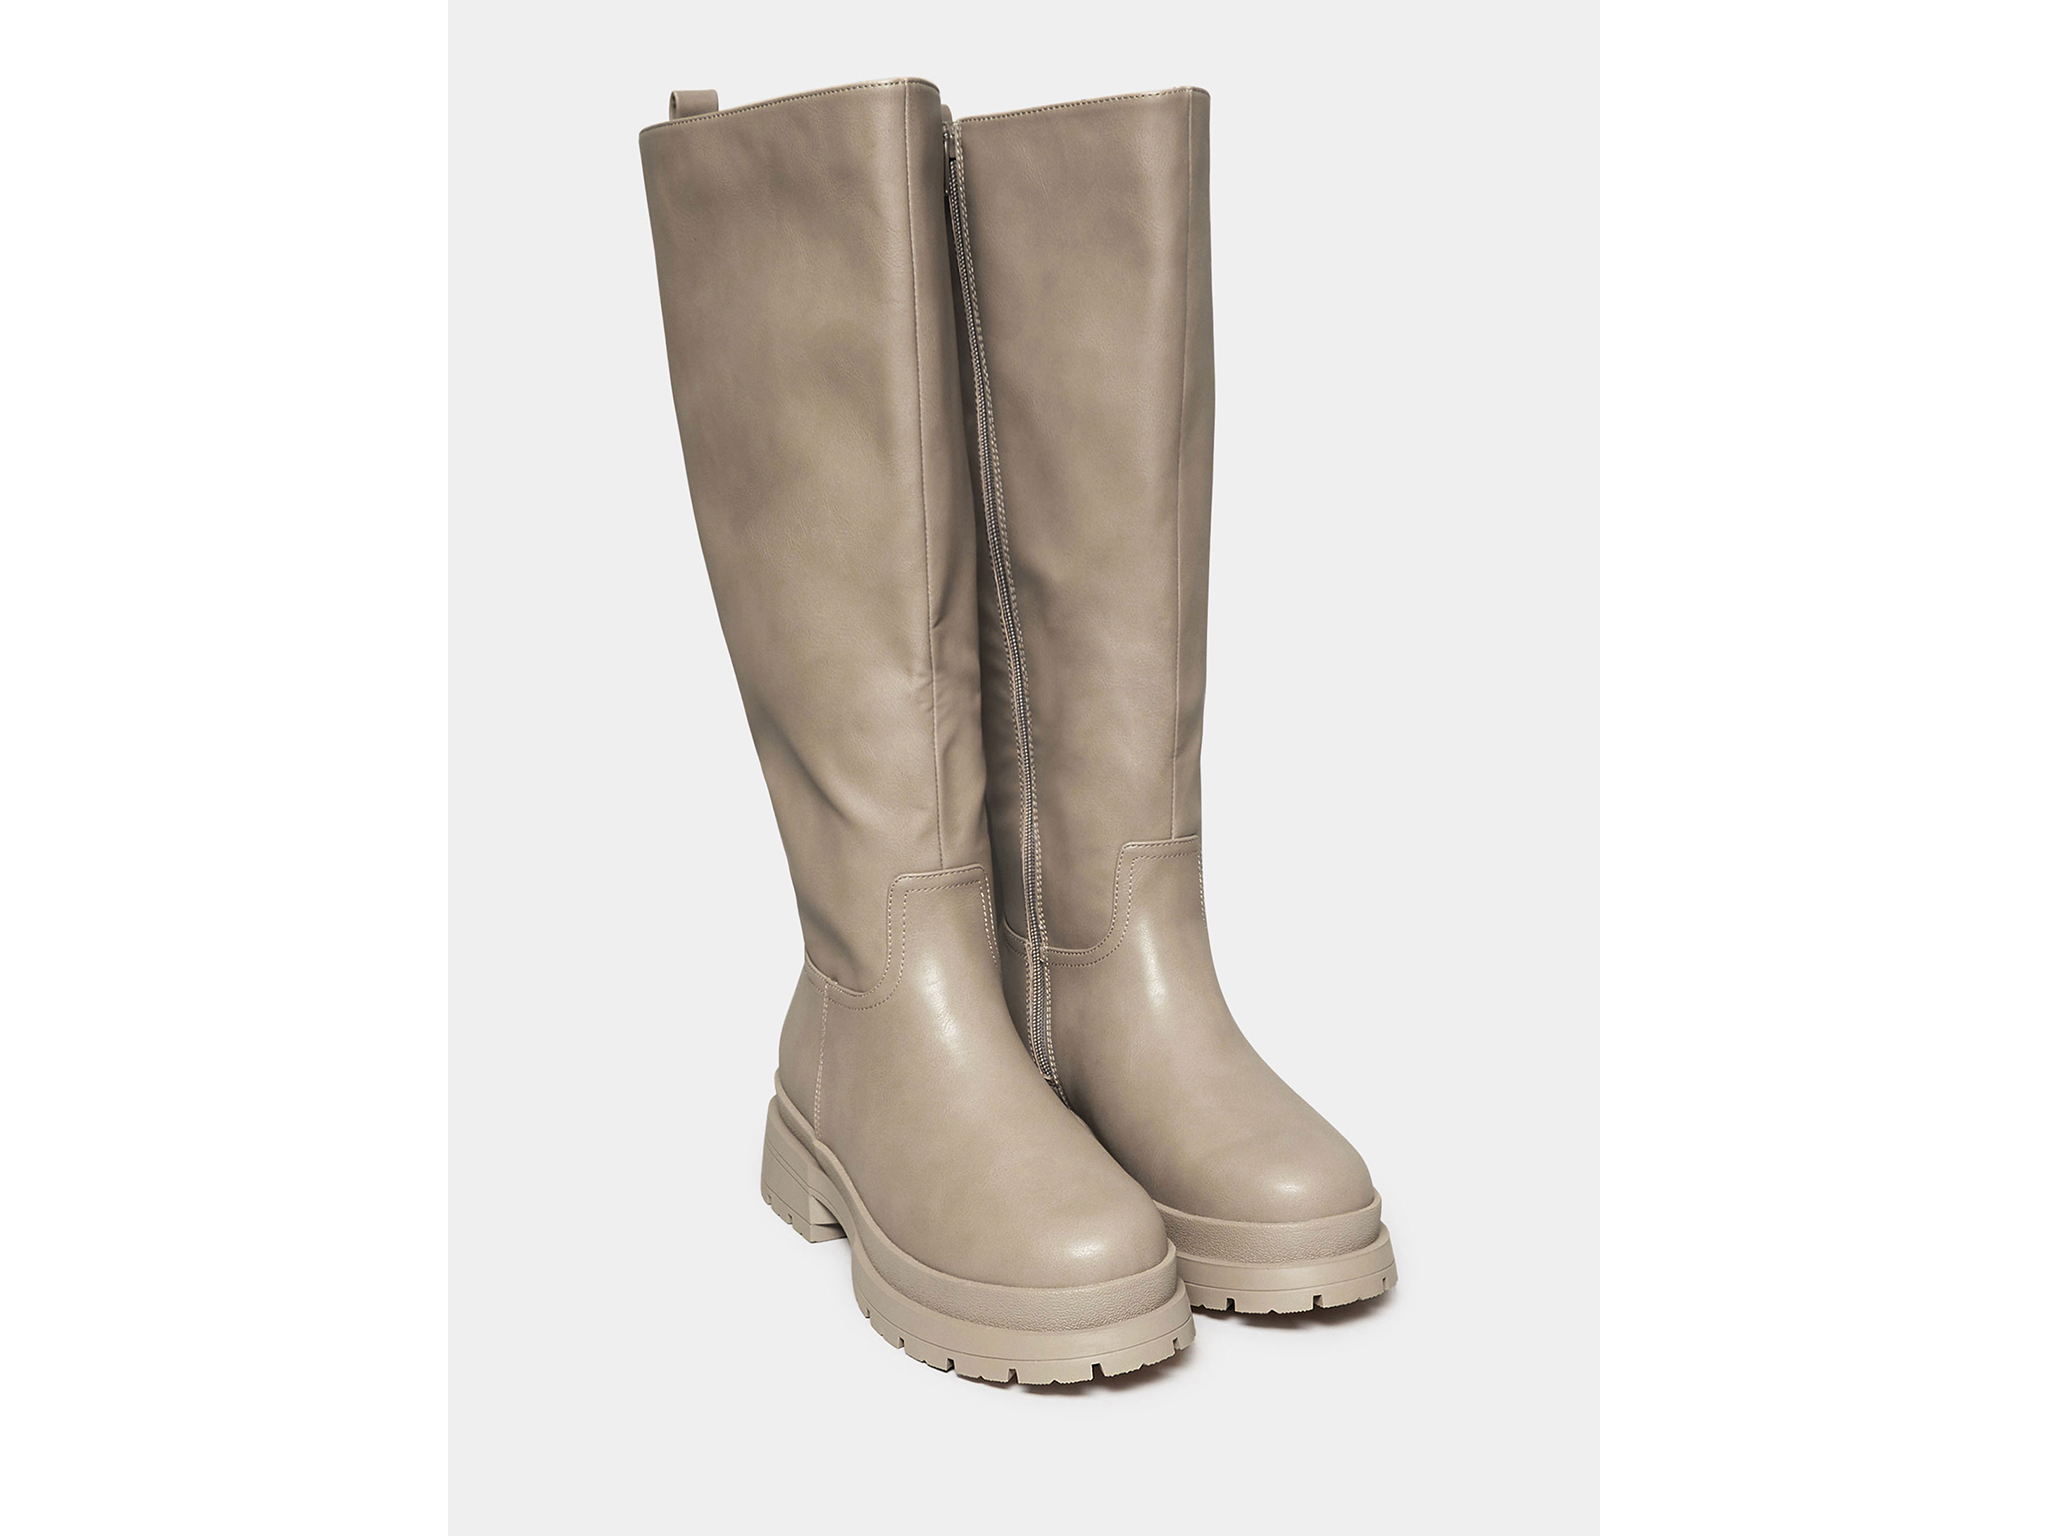 Yours beige brown faux leather knee high boots